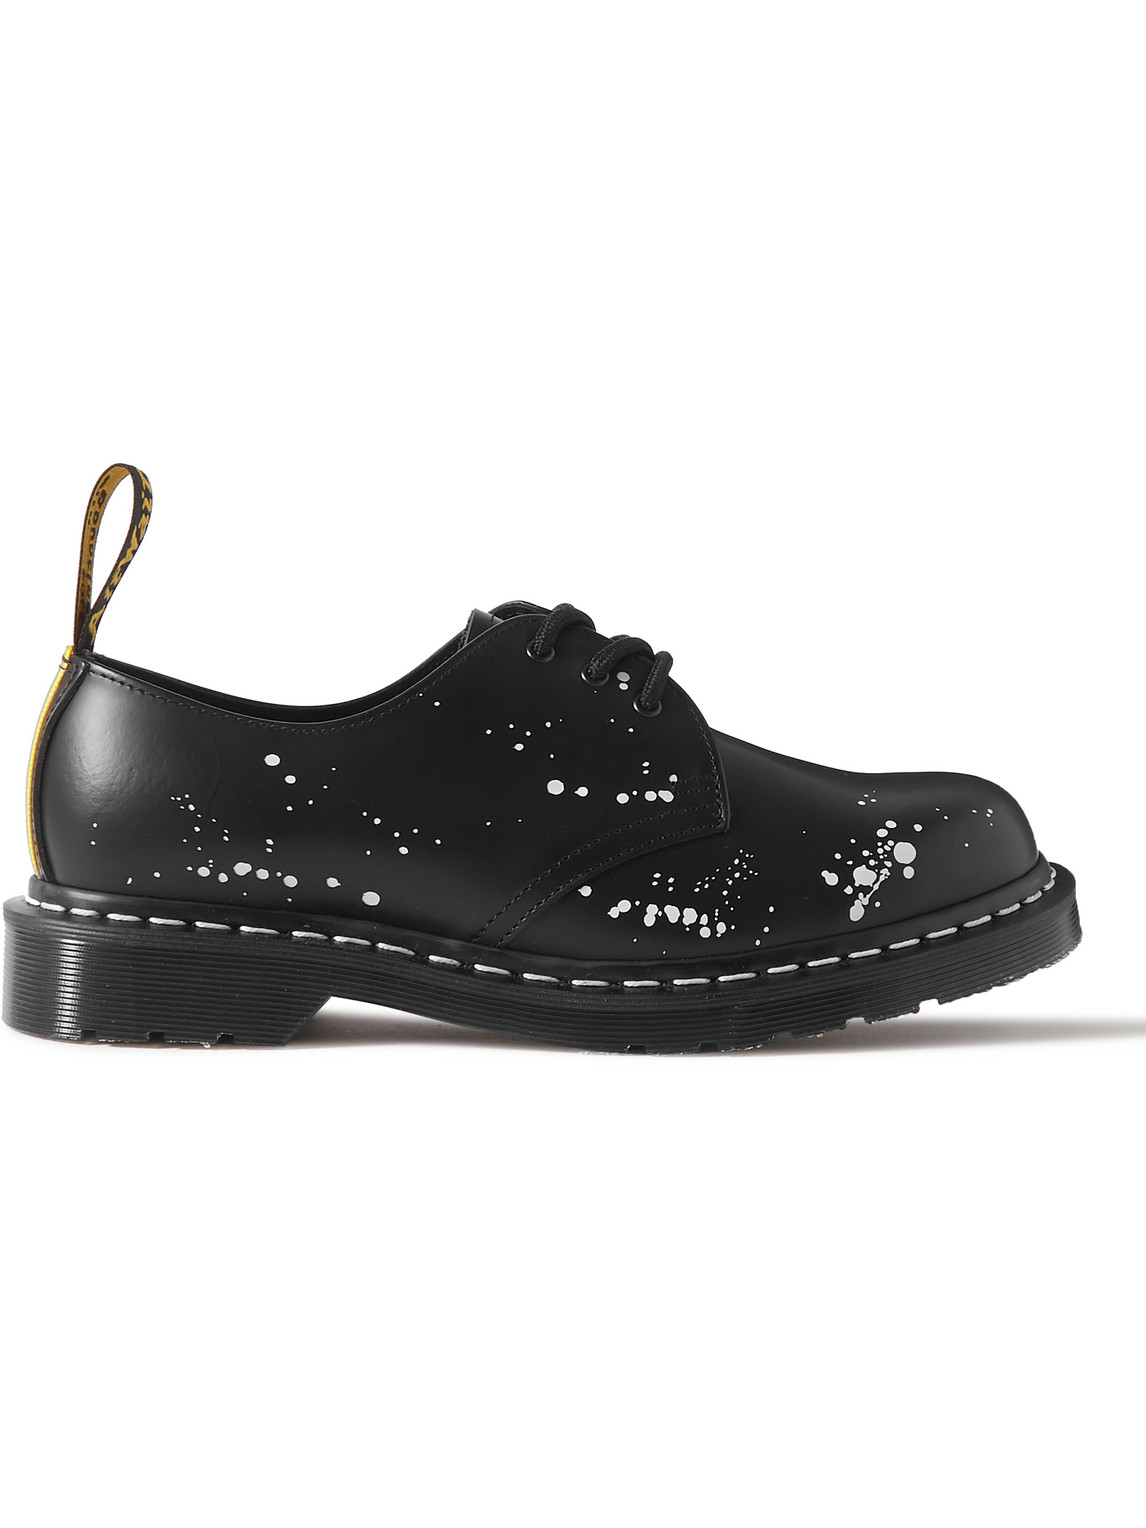 Neighborhood 1461 Paint-Splattered Leather Derby Shoes